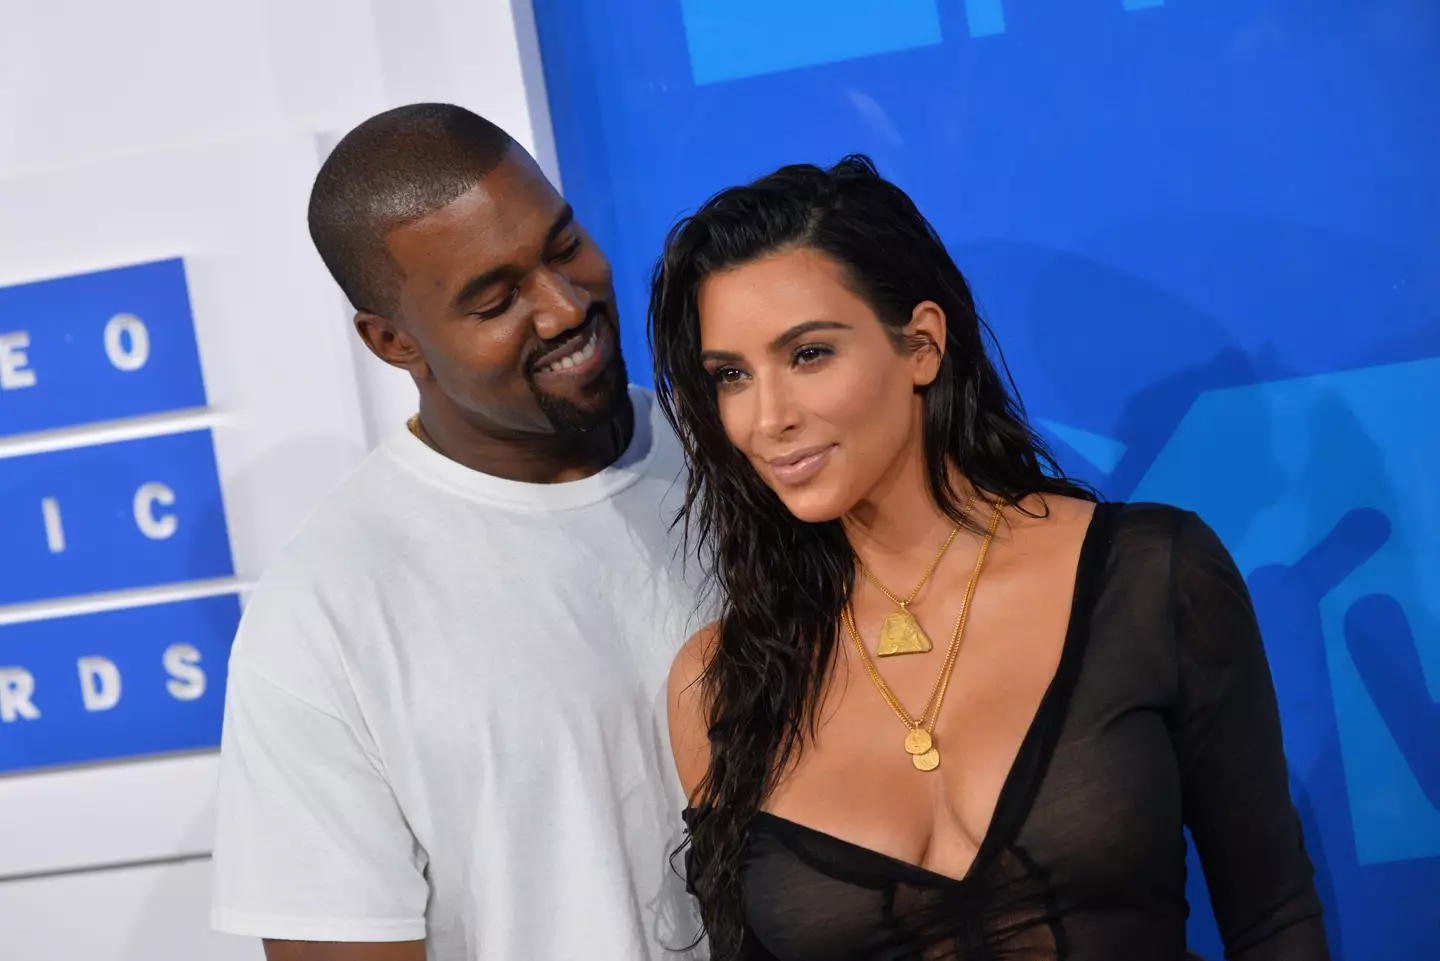 Allegations claim Kanye showed staff members naked pictures of his ex-wife Kim Kardashian.